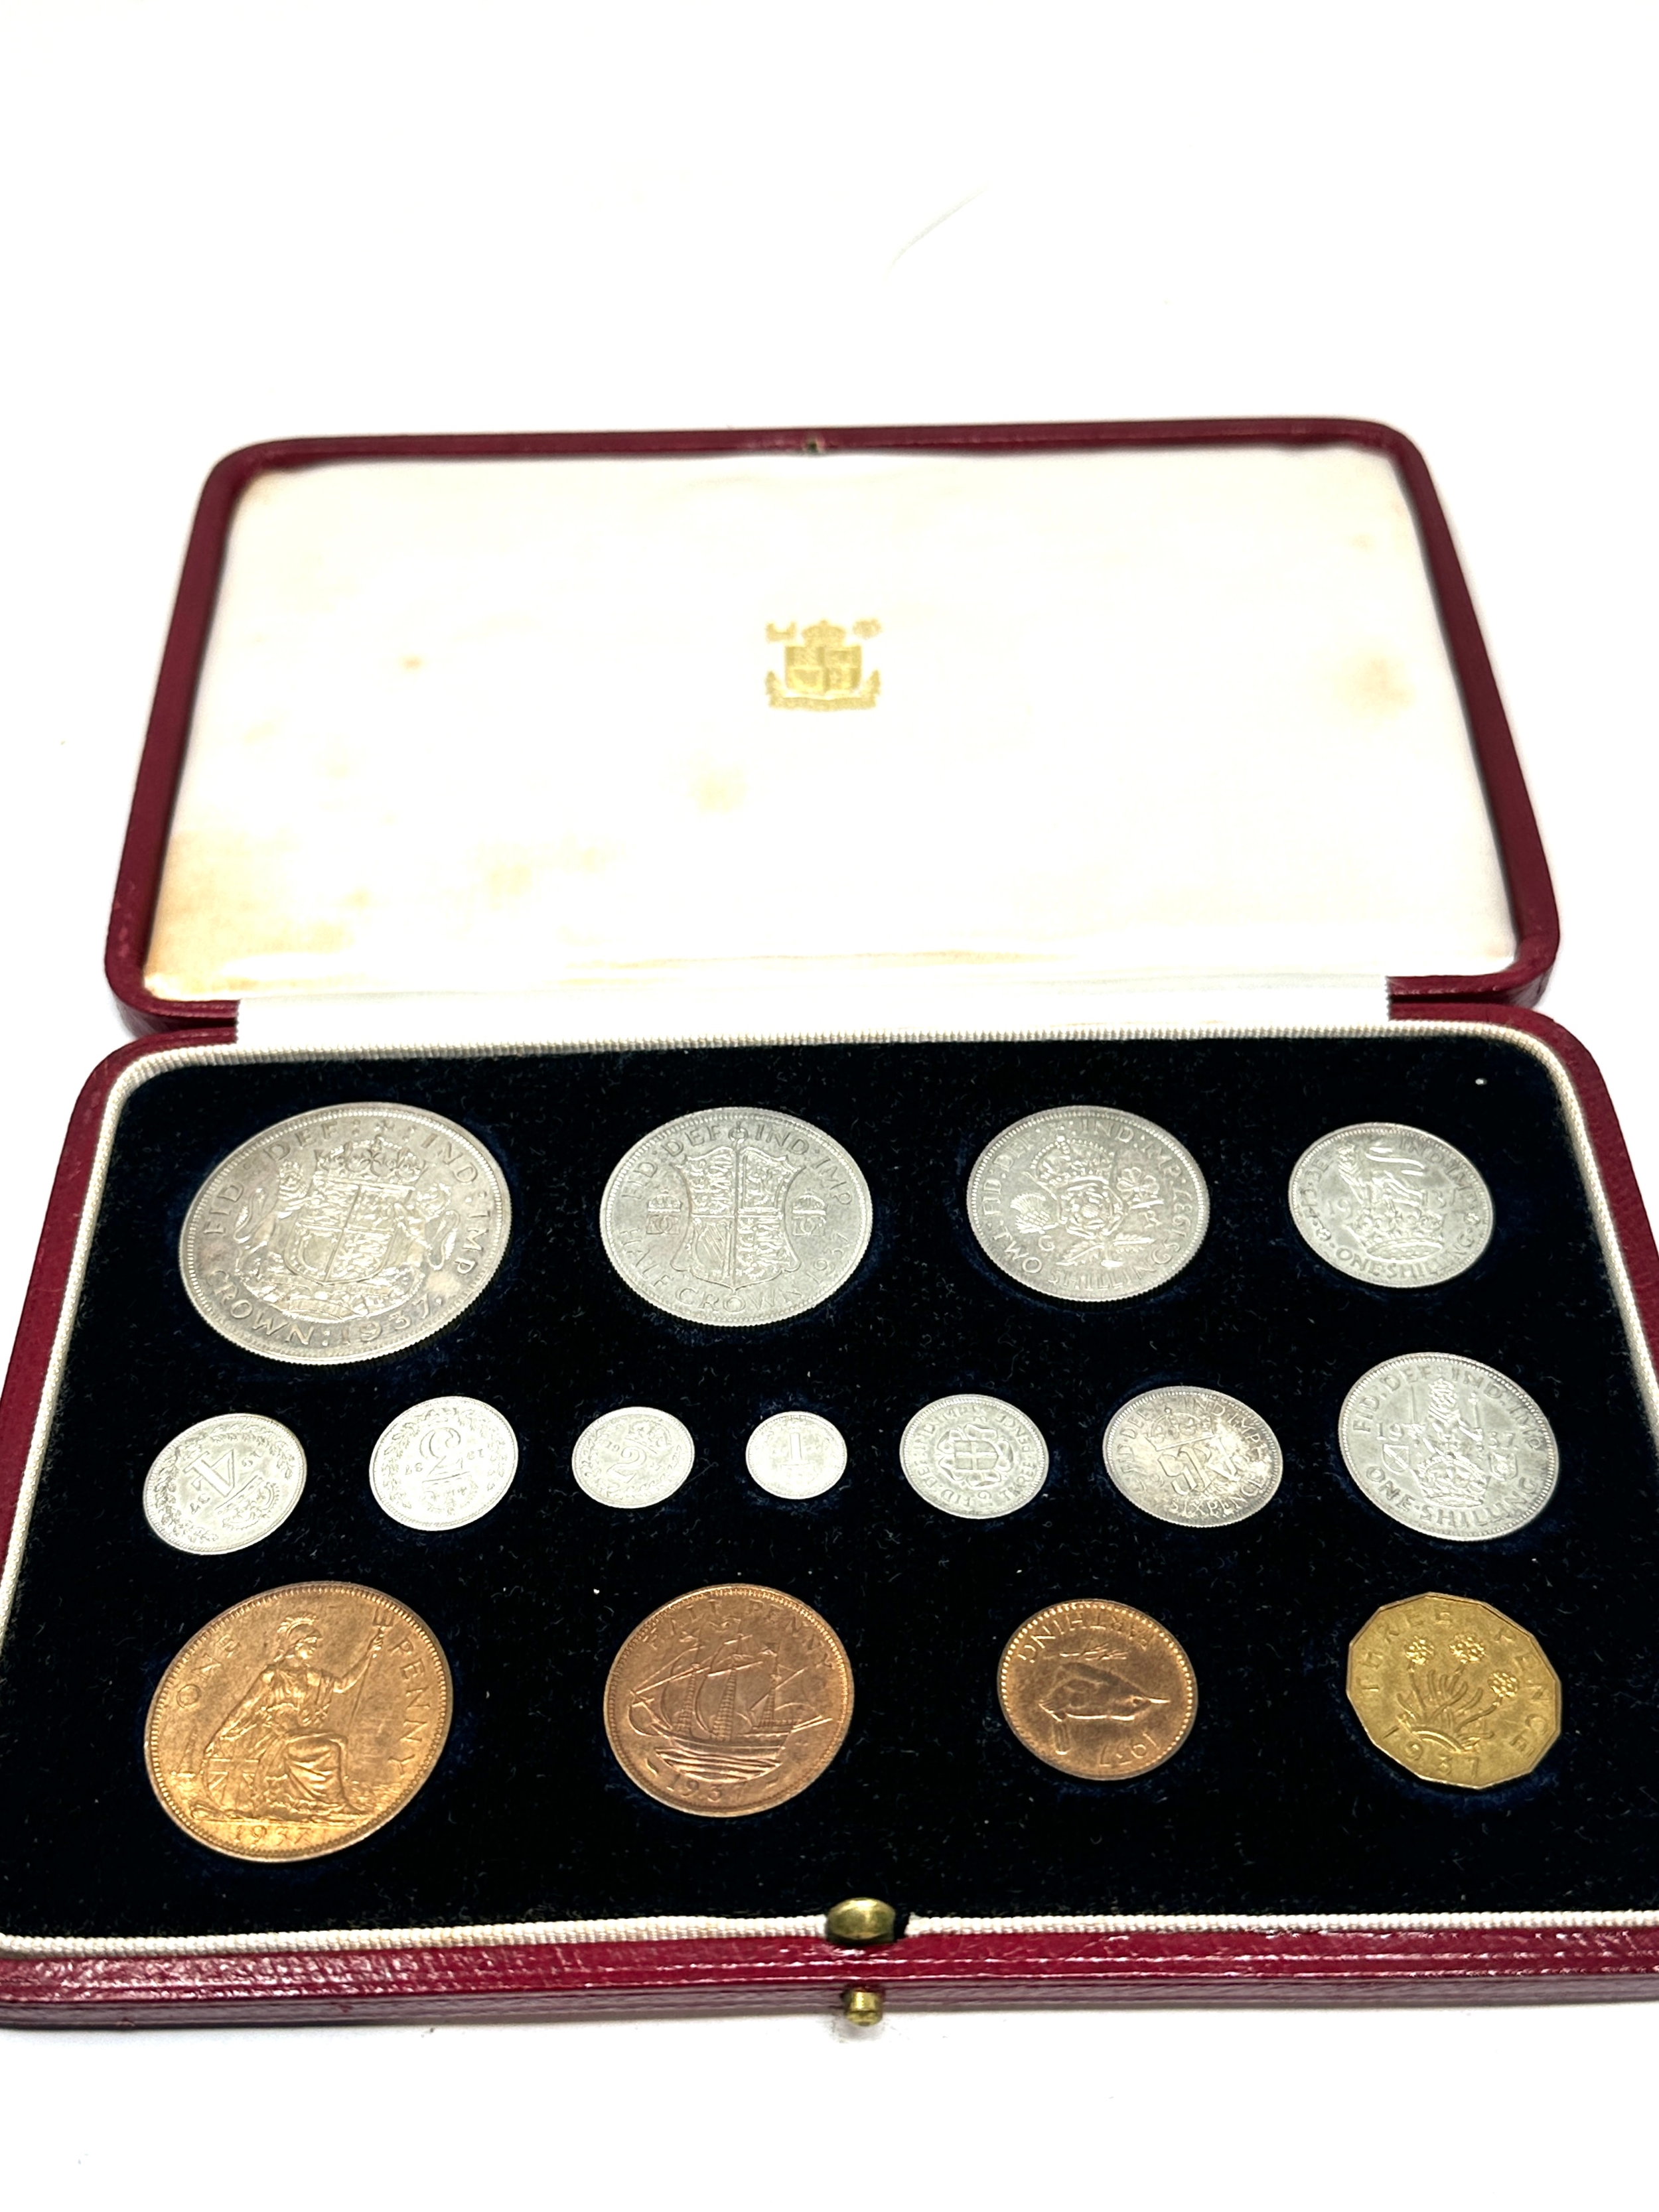 Silver Specimen 1937 15 Coin Set Crown - Farthing & Maundy Money original boxed set in unc condition